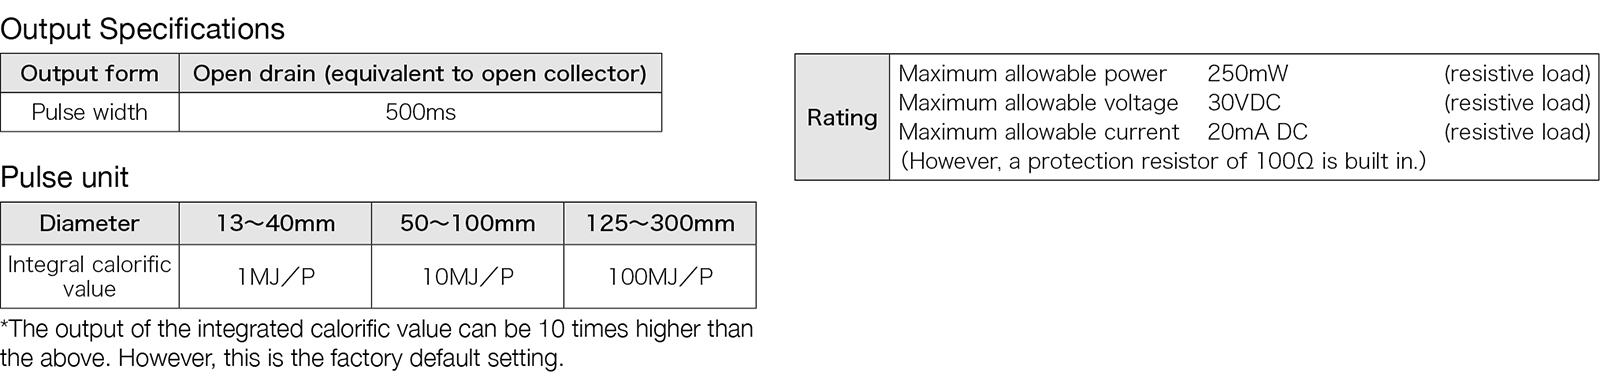 Output Specifications/Pulse width